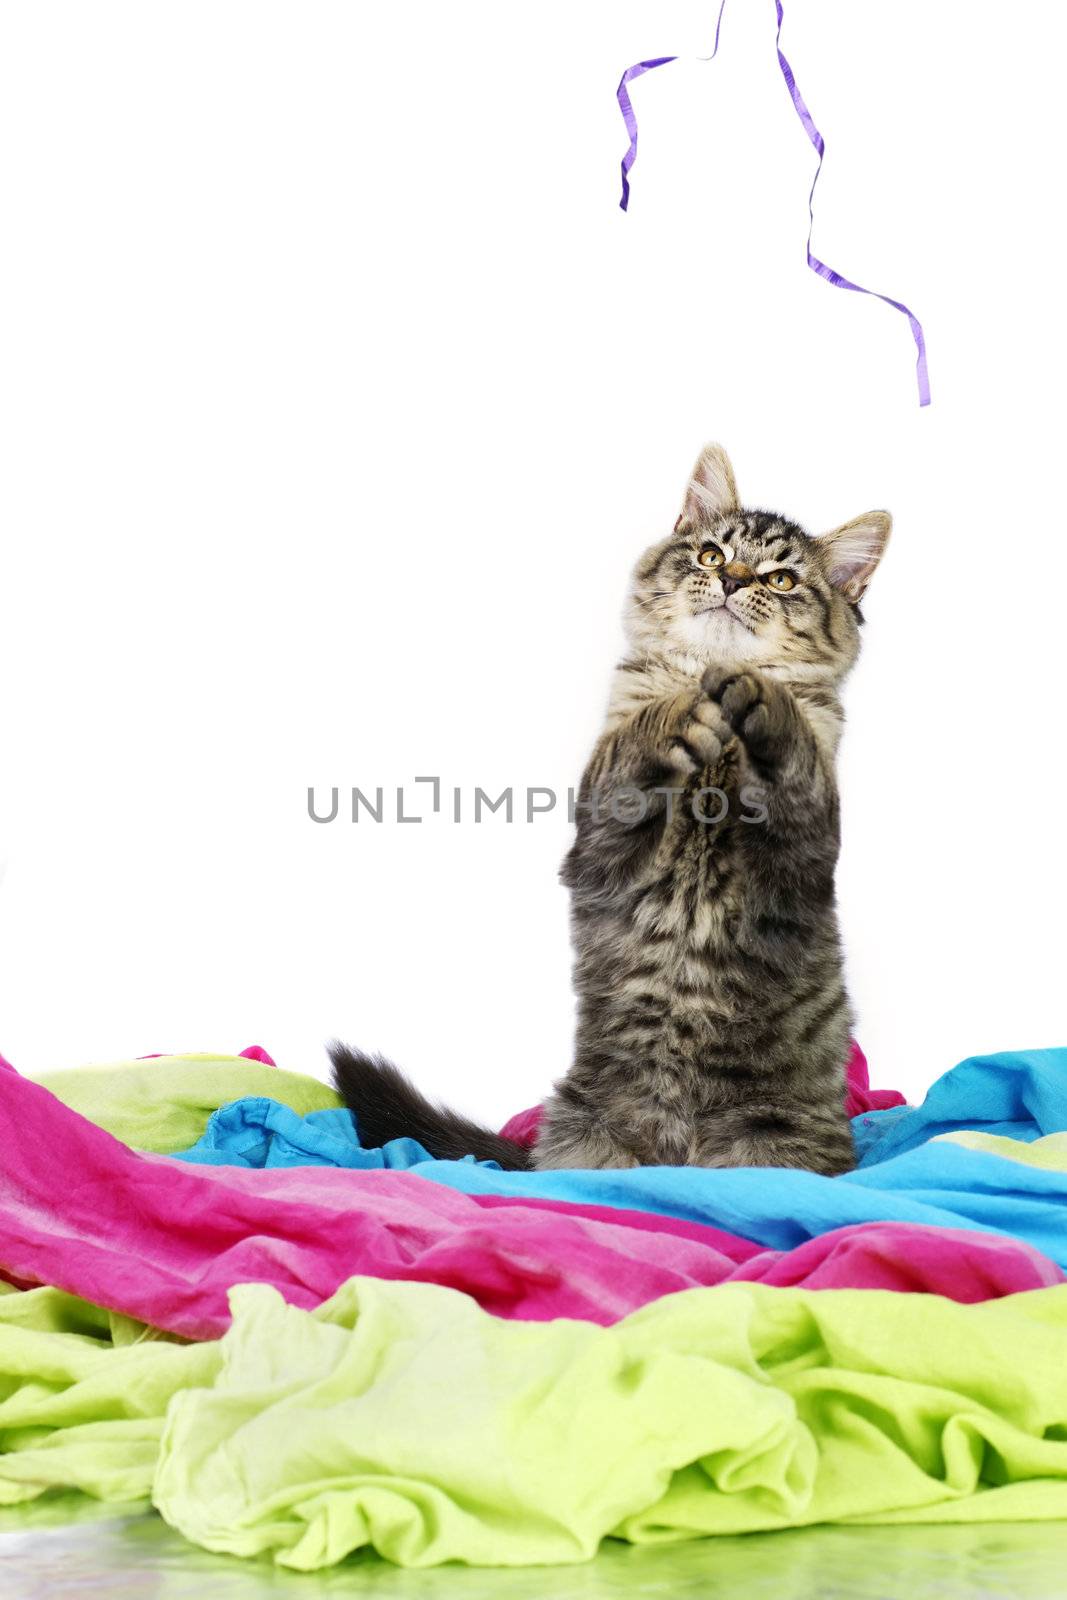 Kitten playing with string by Mirage3